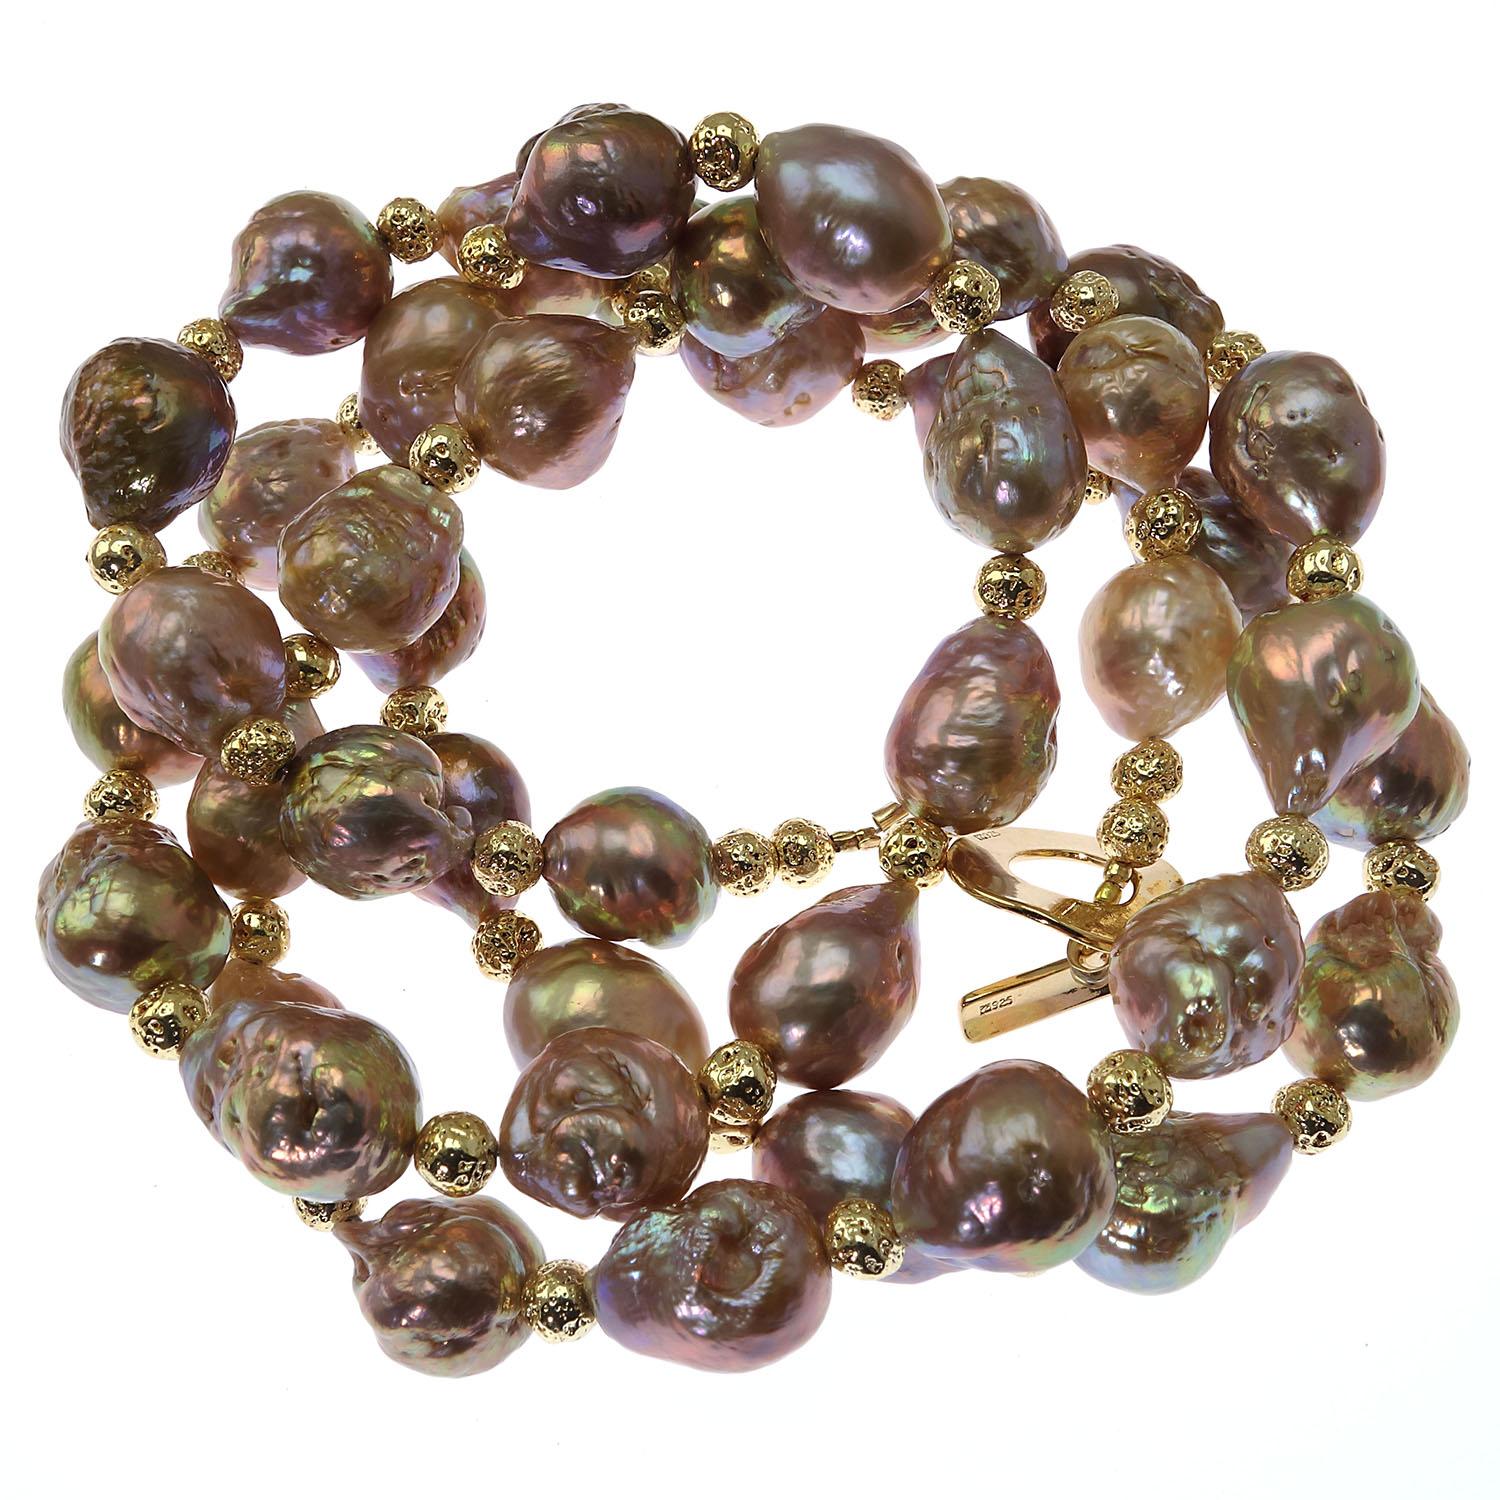 Custom made necklace of Natural Freshwater golden Pearls and goldy accents.  These unique pearls with their undertone of gold and mauve have flashes of pink and blue.  The gold accents enhance the natual rich gold of the pearls. This handmade